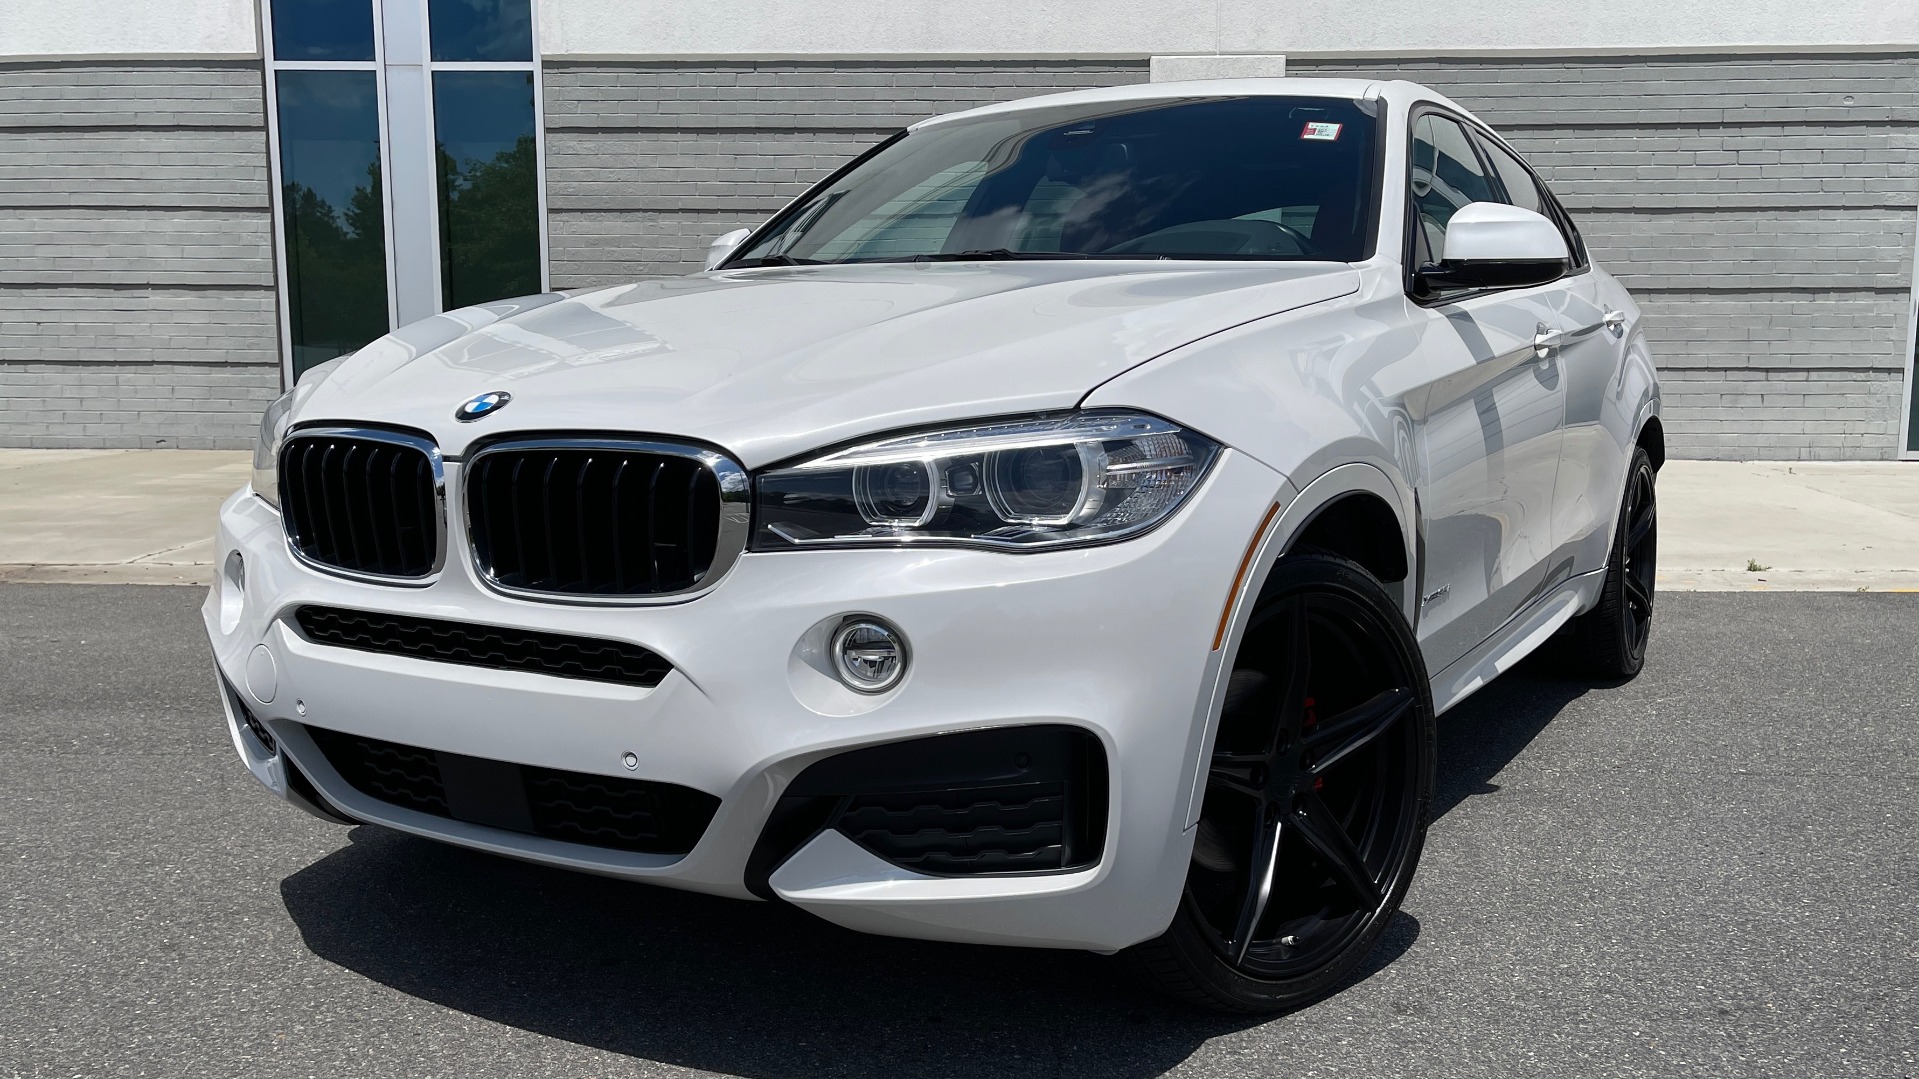 Used 2018 BMW X6 XDRIVE35I M-SPORT / NAV / DRVR ASST PLUS / ADAPT M-SUSP / REARVIEW for sale Sold at Formula Imports in Charlotte NC 28227 6